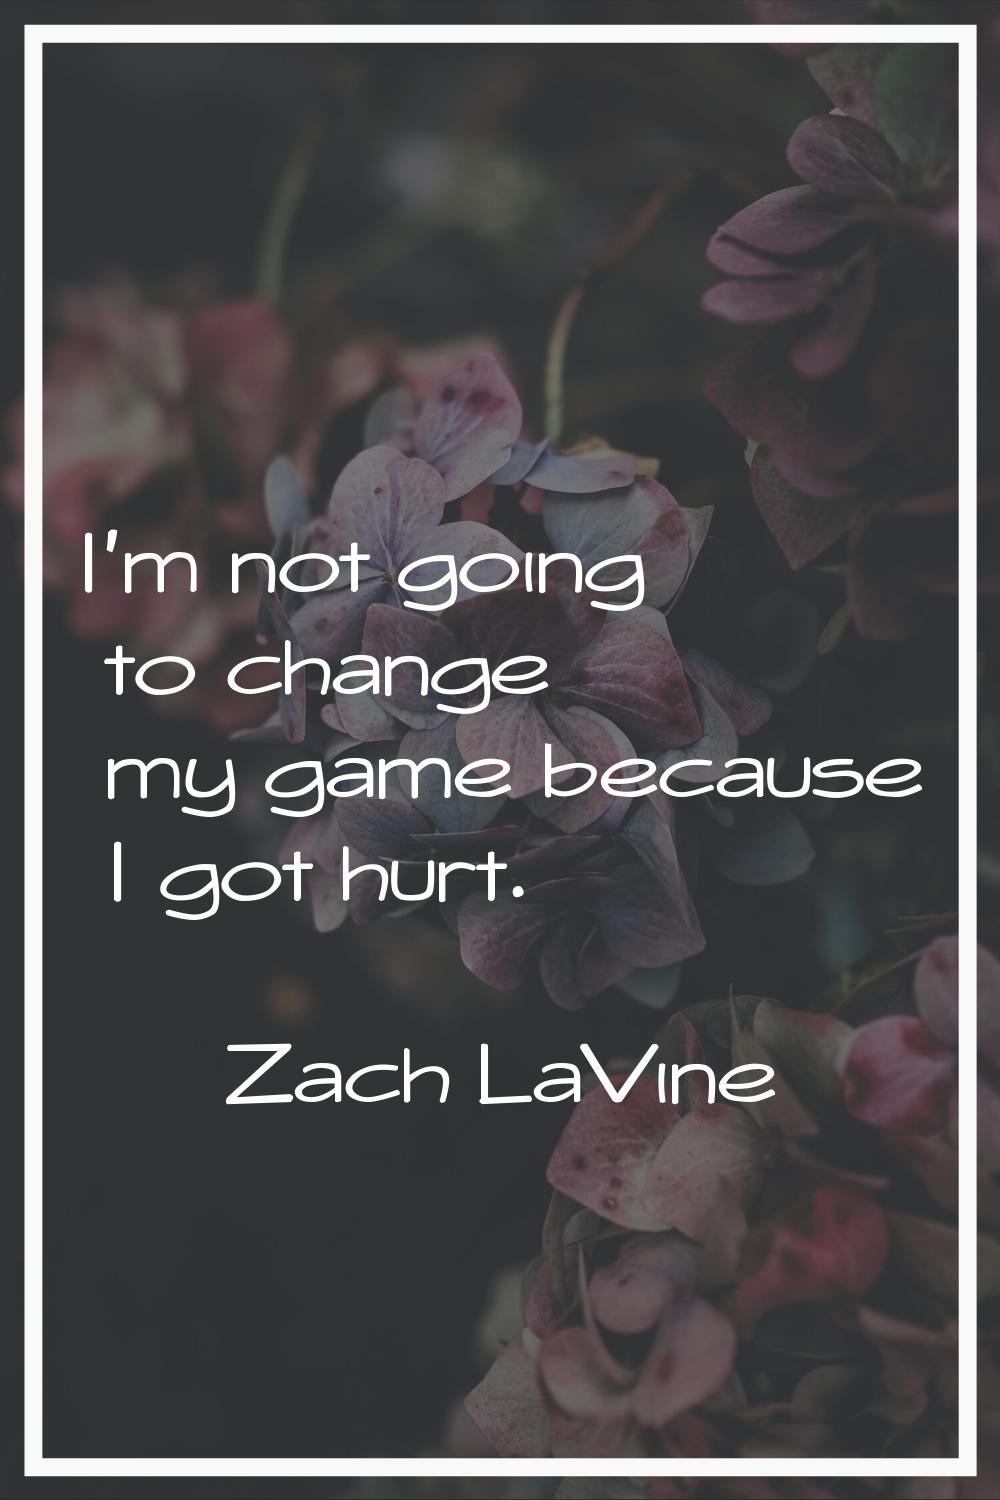 I'm not going to change my game because I got hurt.